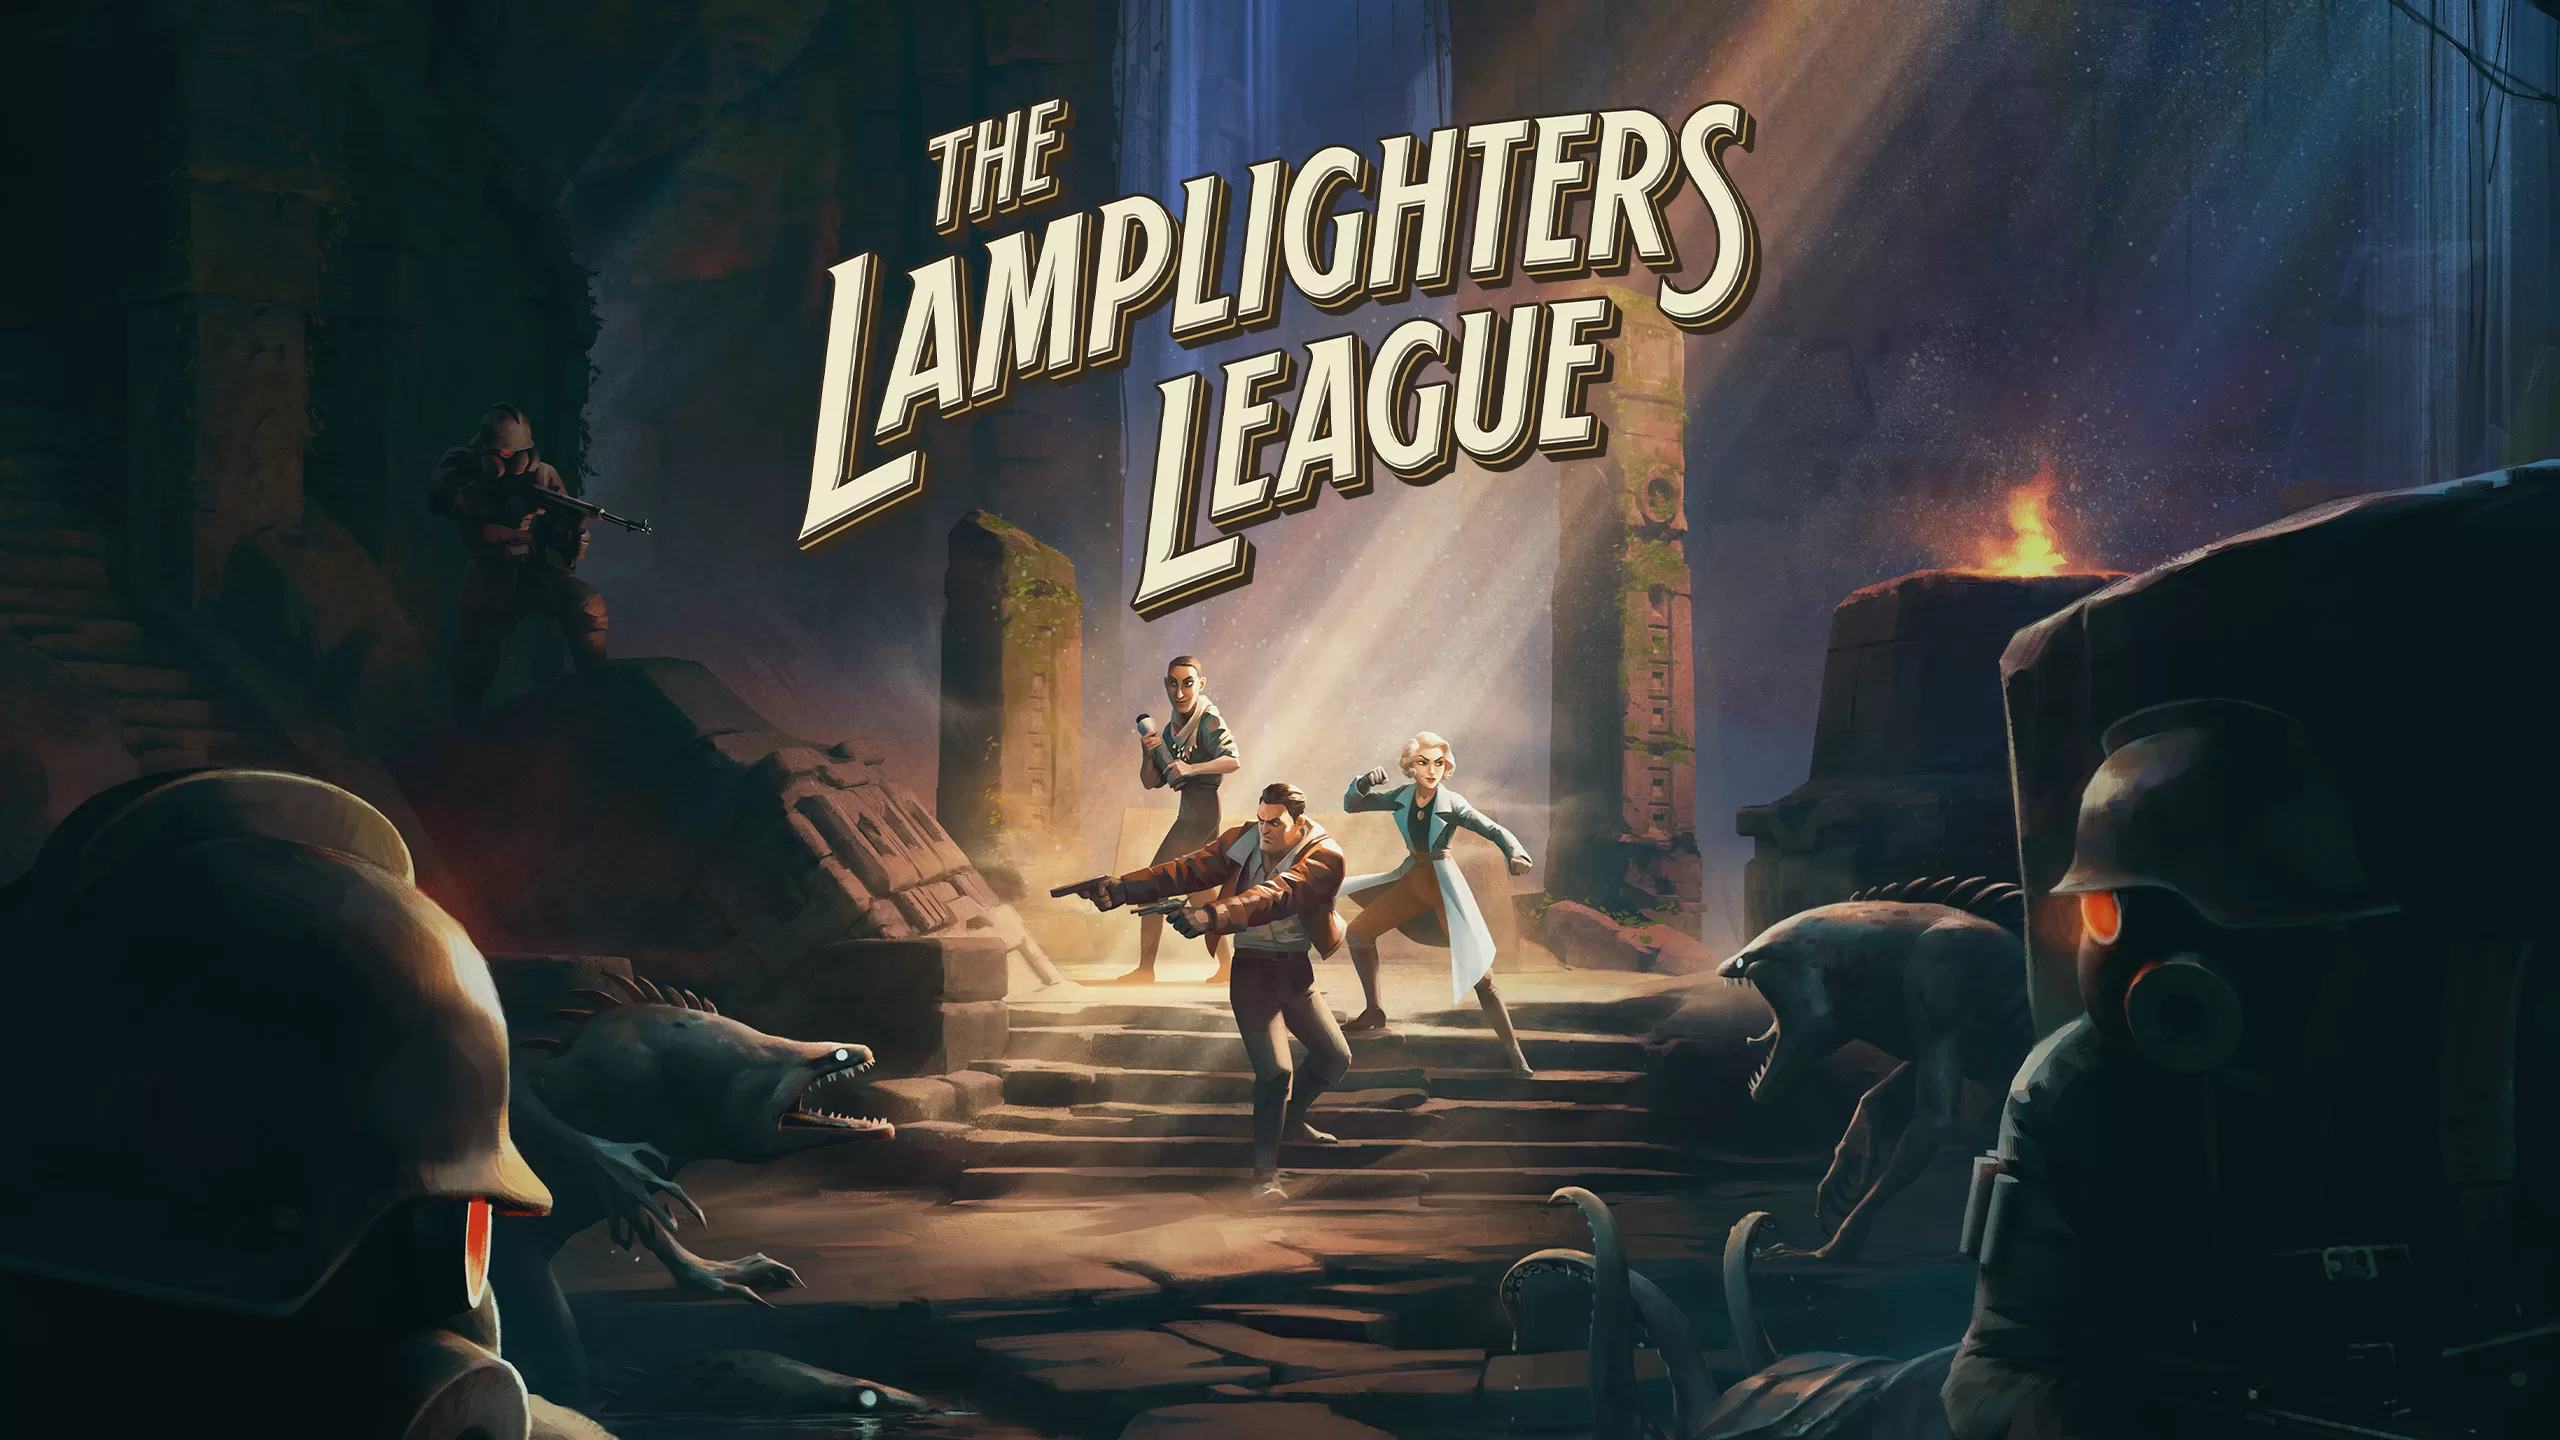 The Lamplighters League – An Upcoming Game to Watch Out For